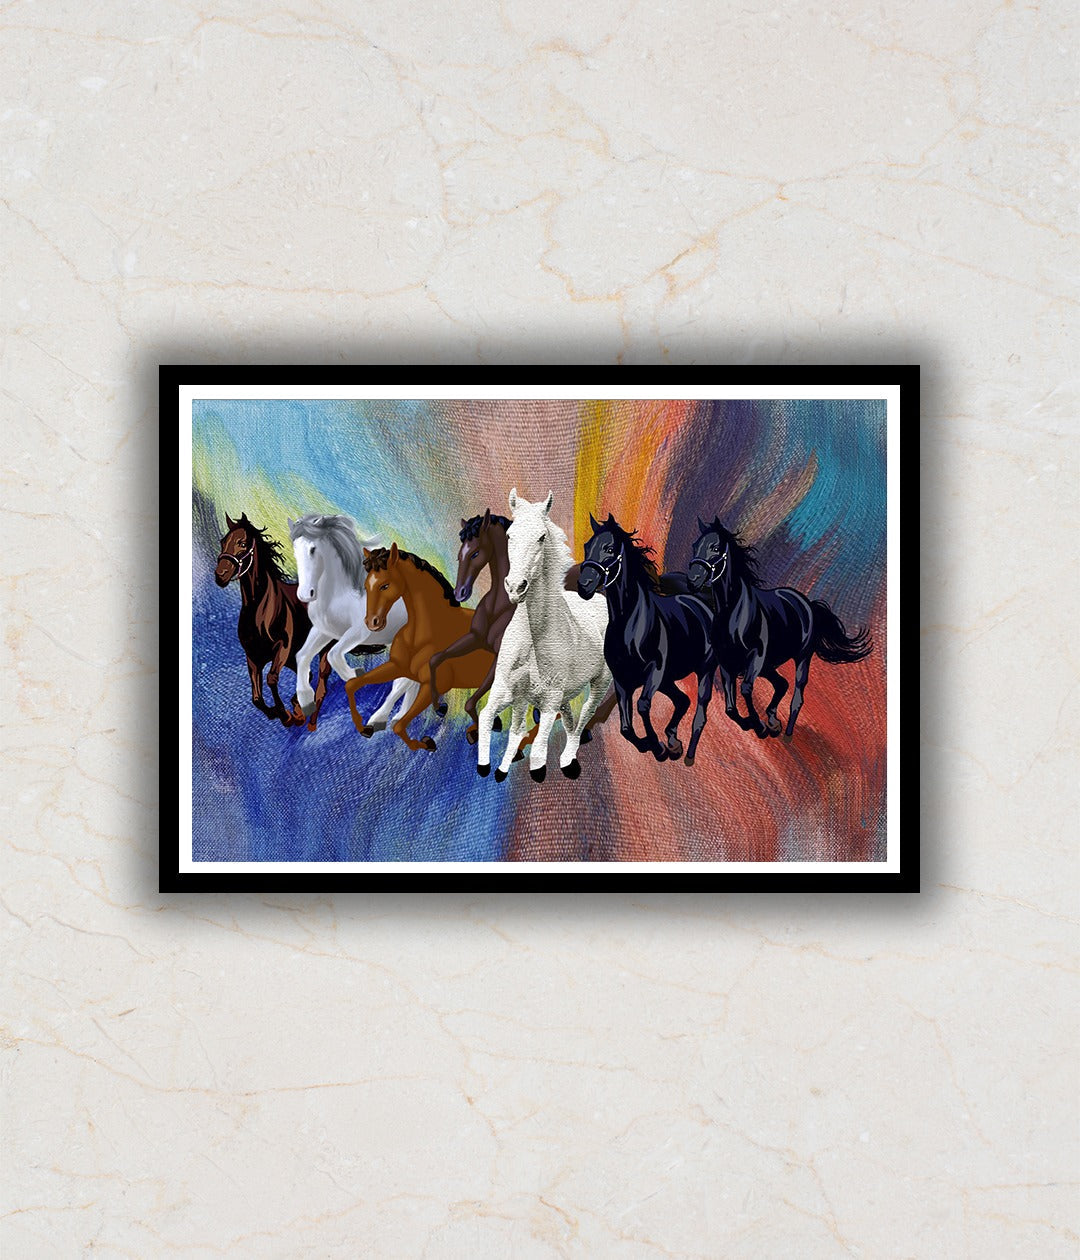 Seven Running Horses Painting Abstract